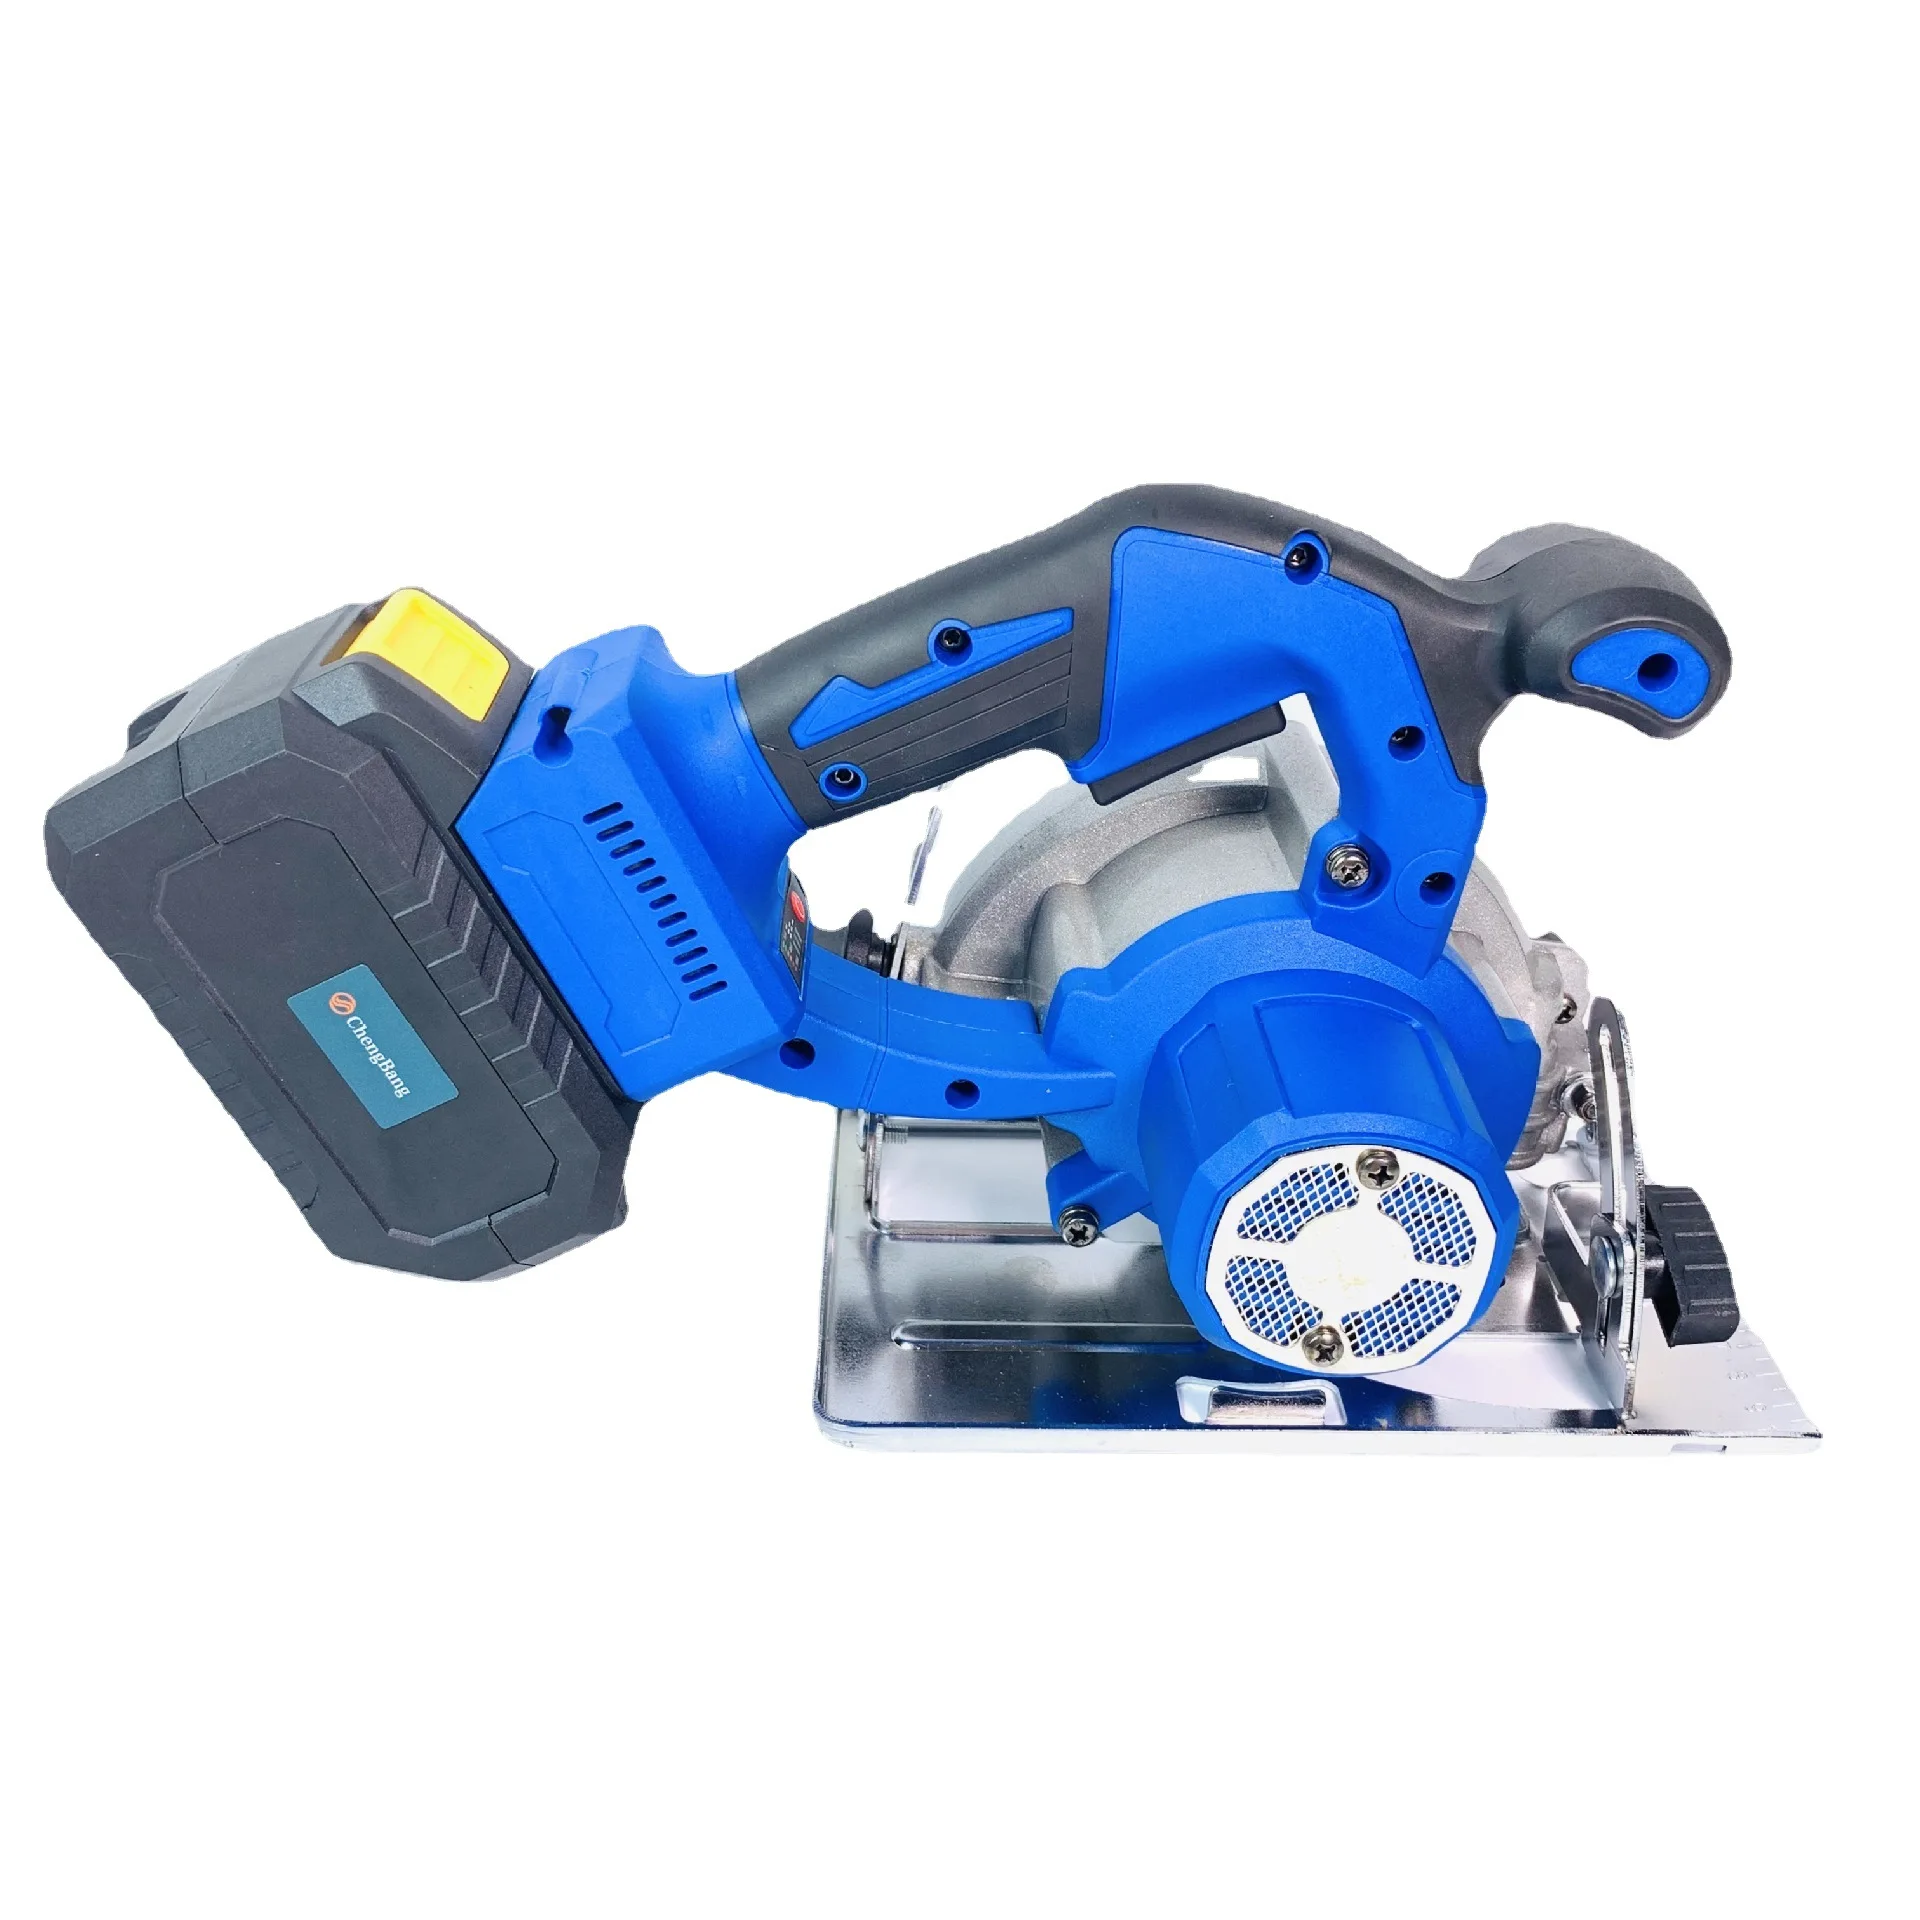 

Deep bluefive inches brushless electric circular saw cutting 01